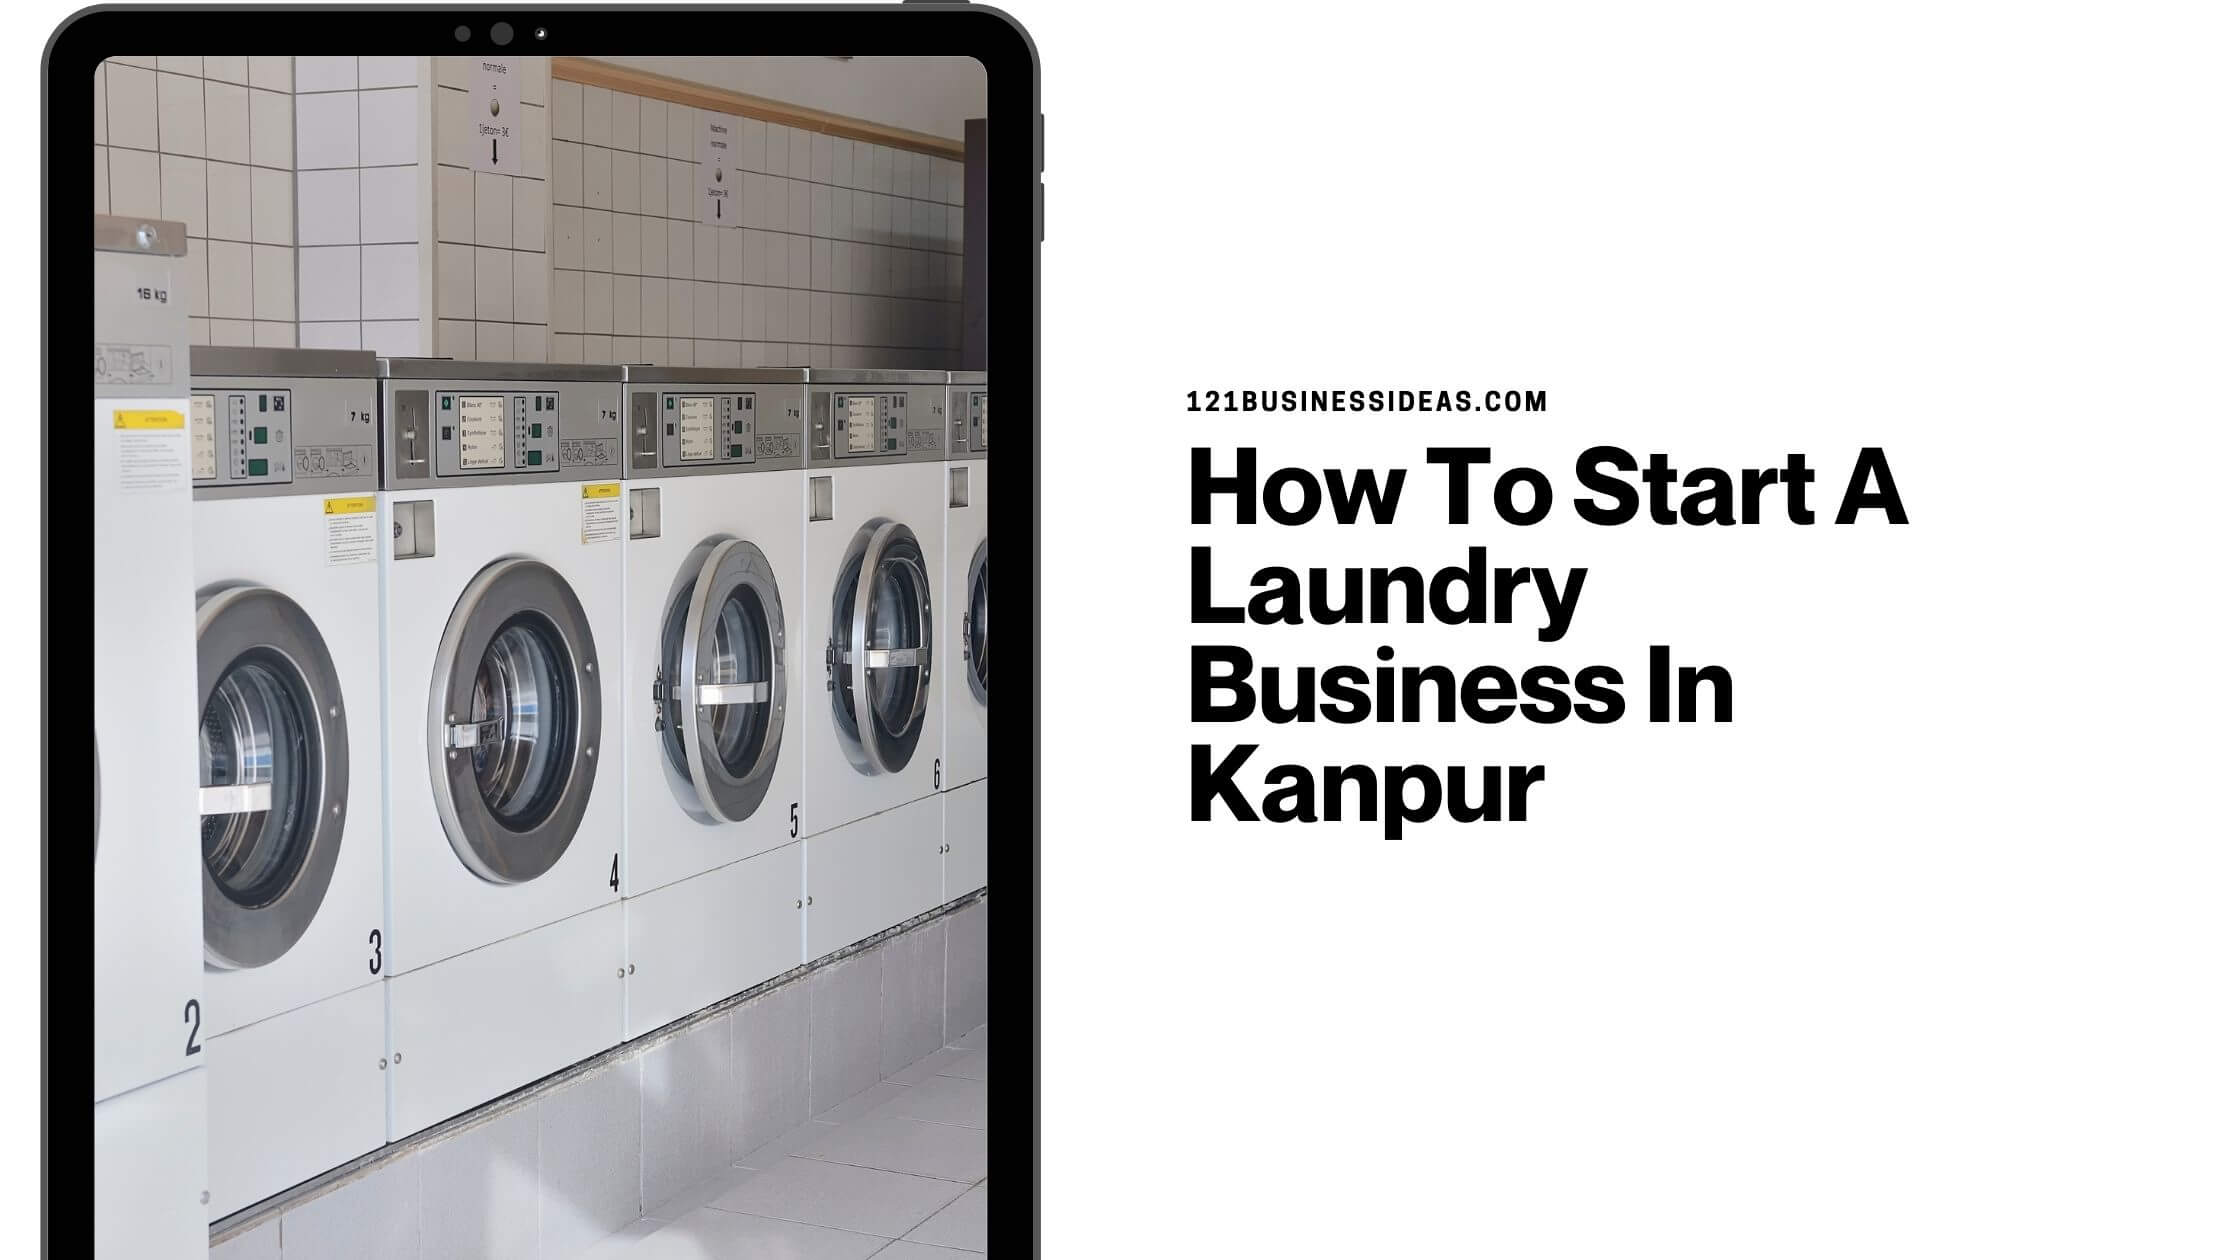 How To Start A Laundry Business In Kanpur (1)